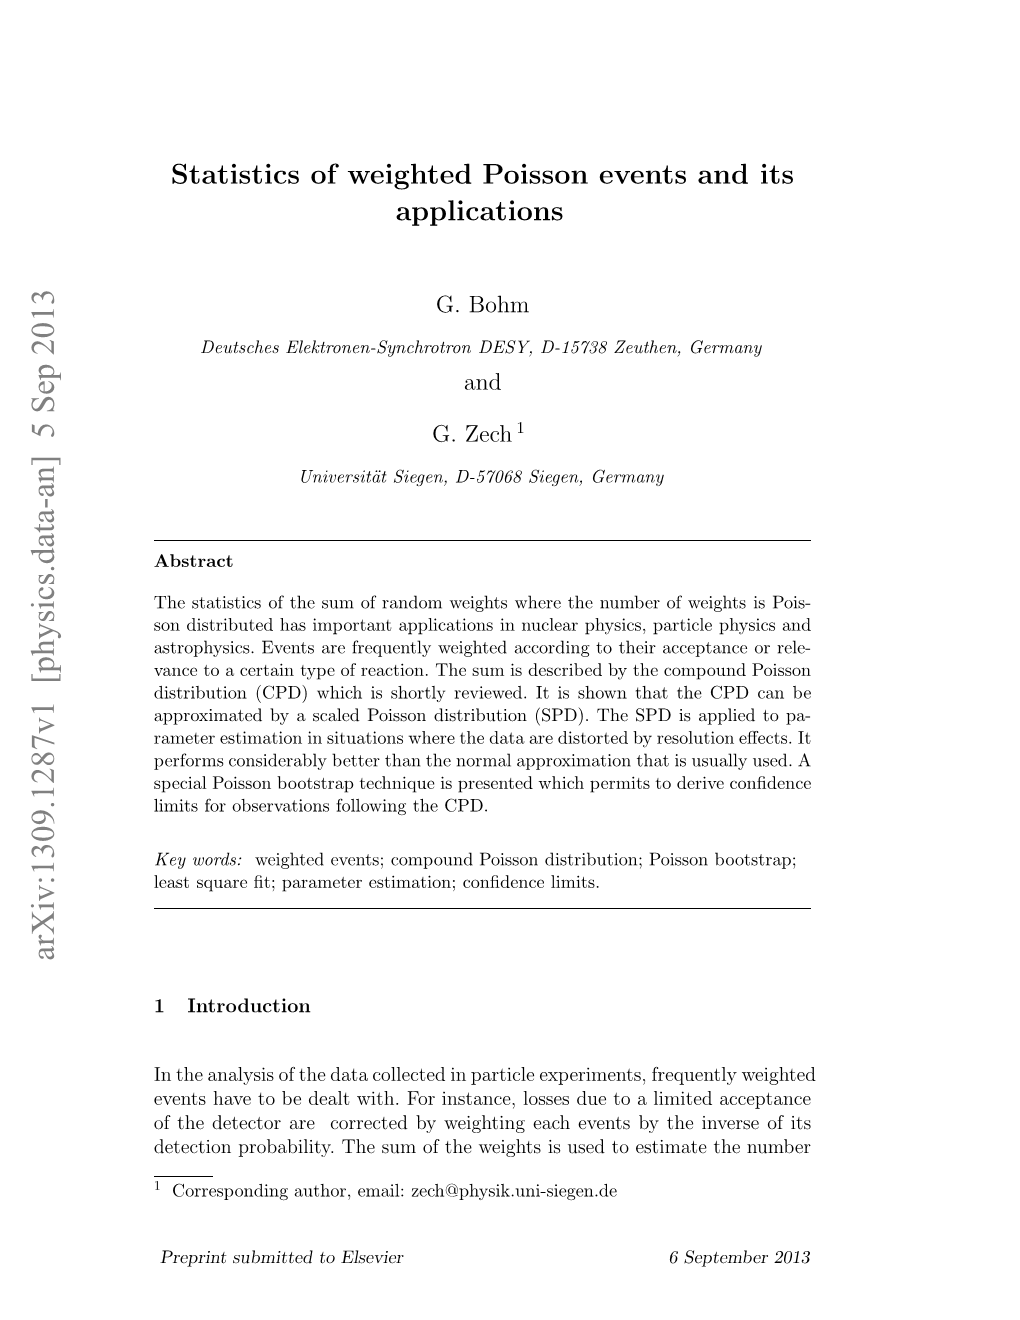 Statistics of Weighted Poisson Events and Its Applications